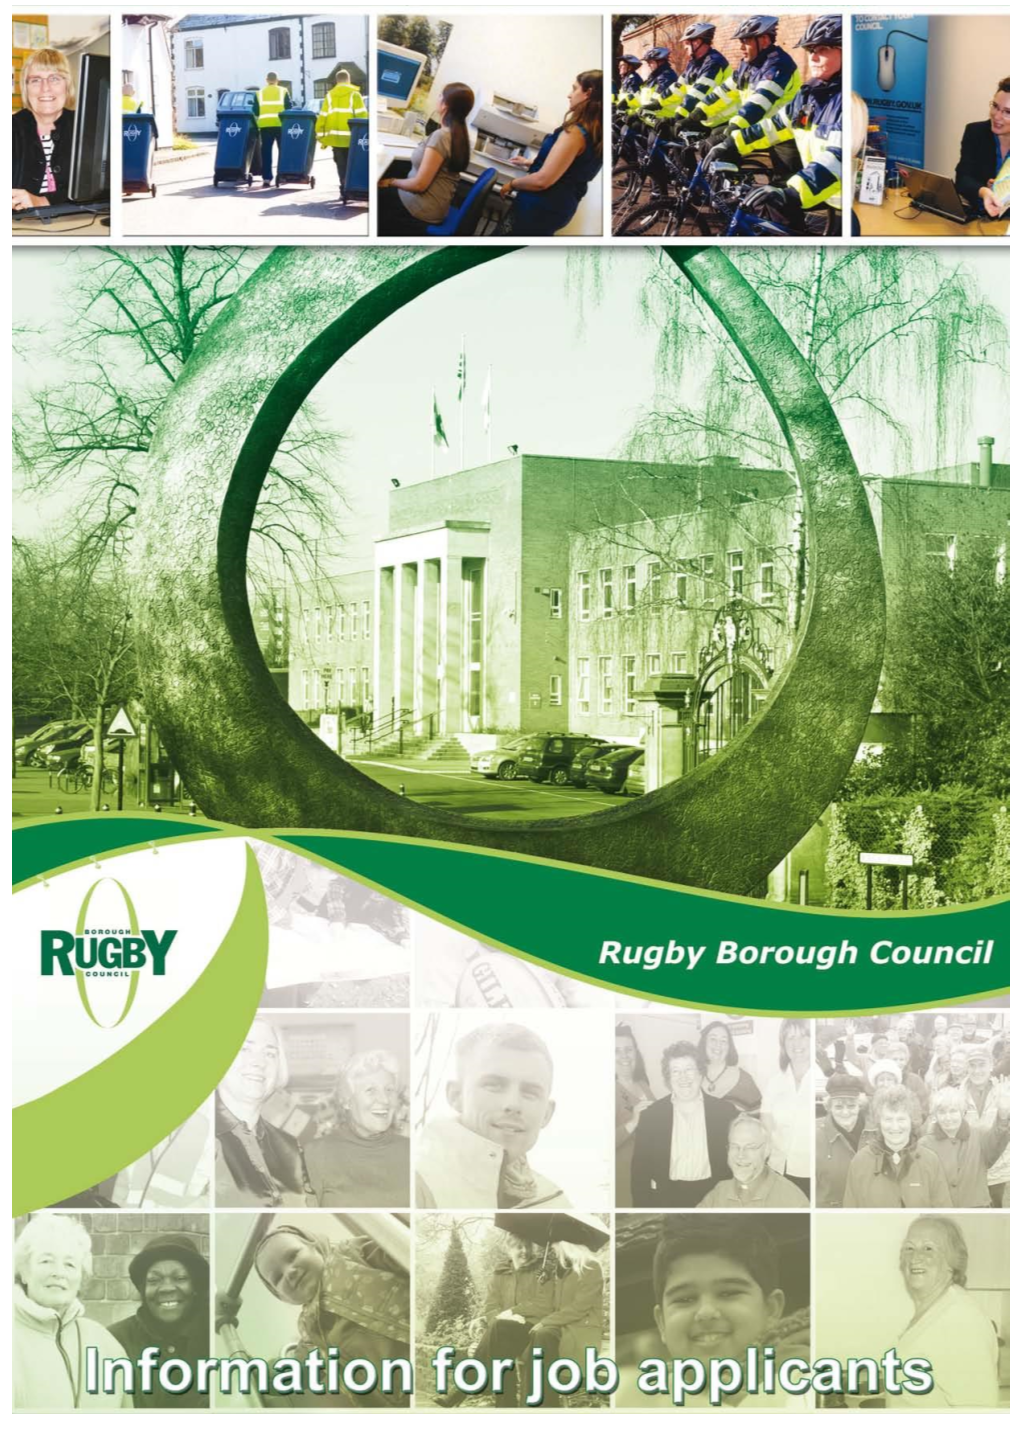 The Borough of Rugby Covers an Area of 87,949 Acres in Warwickshire